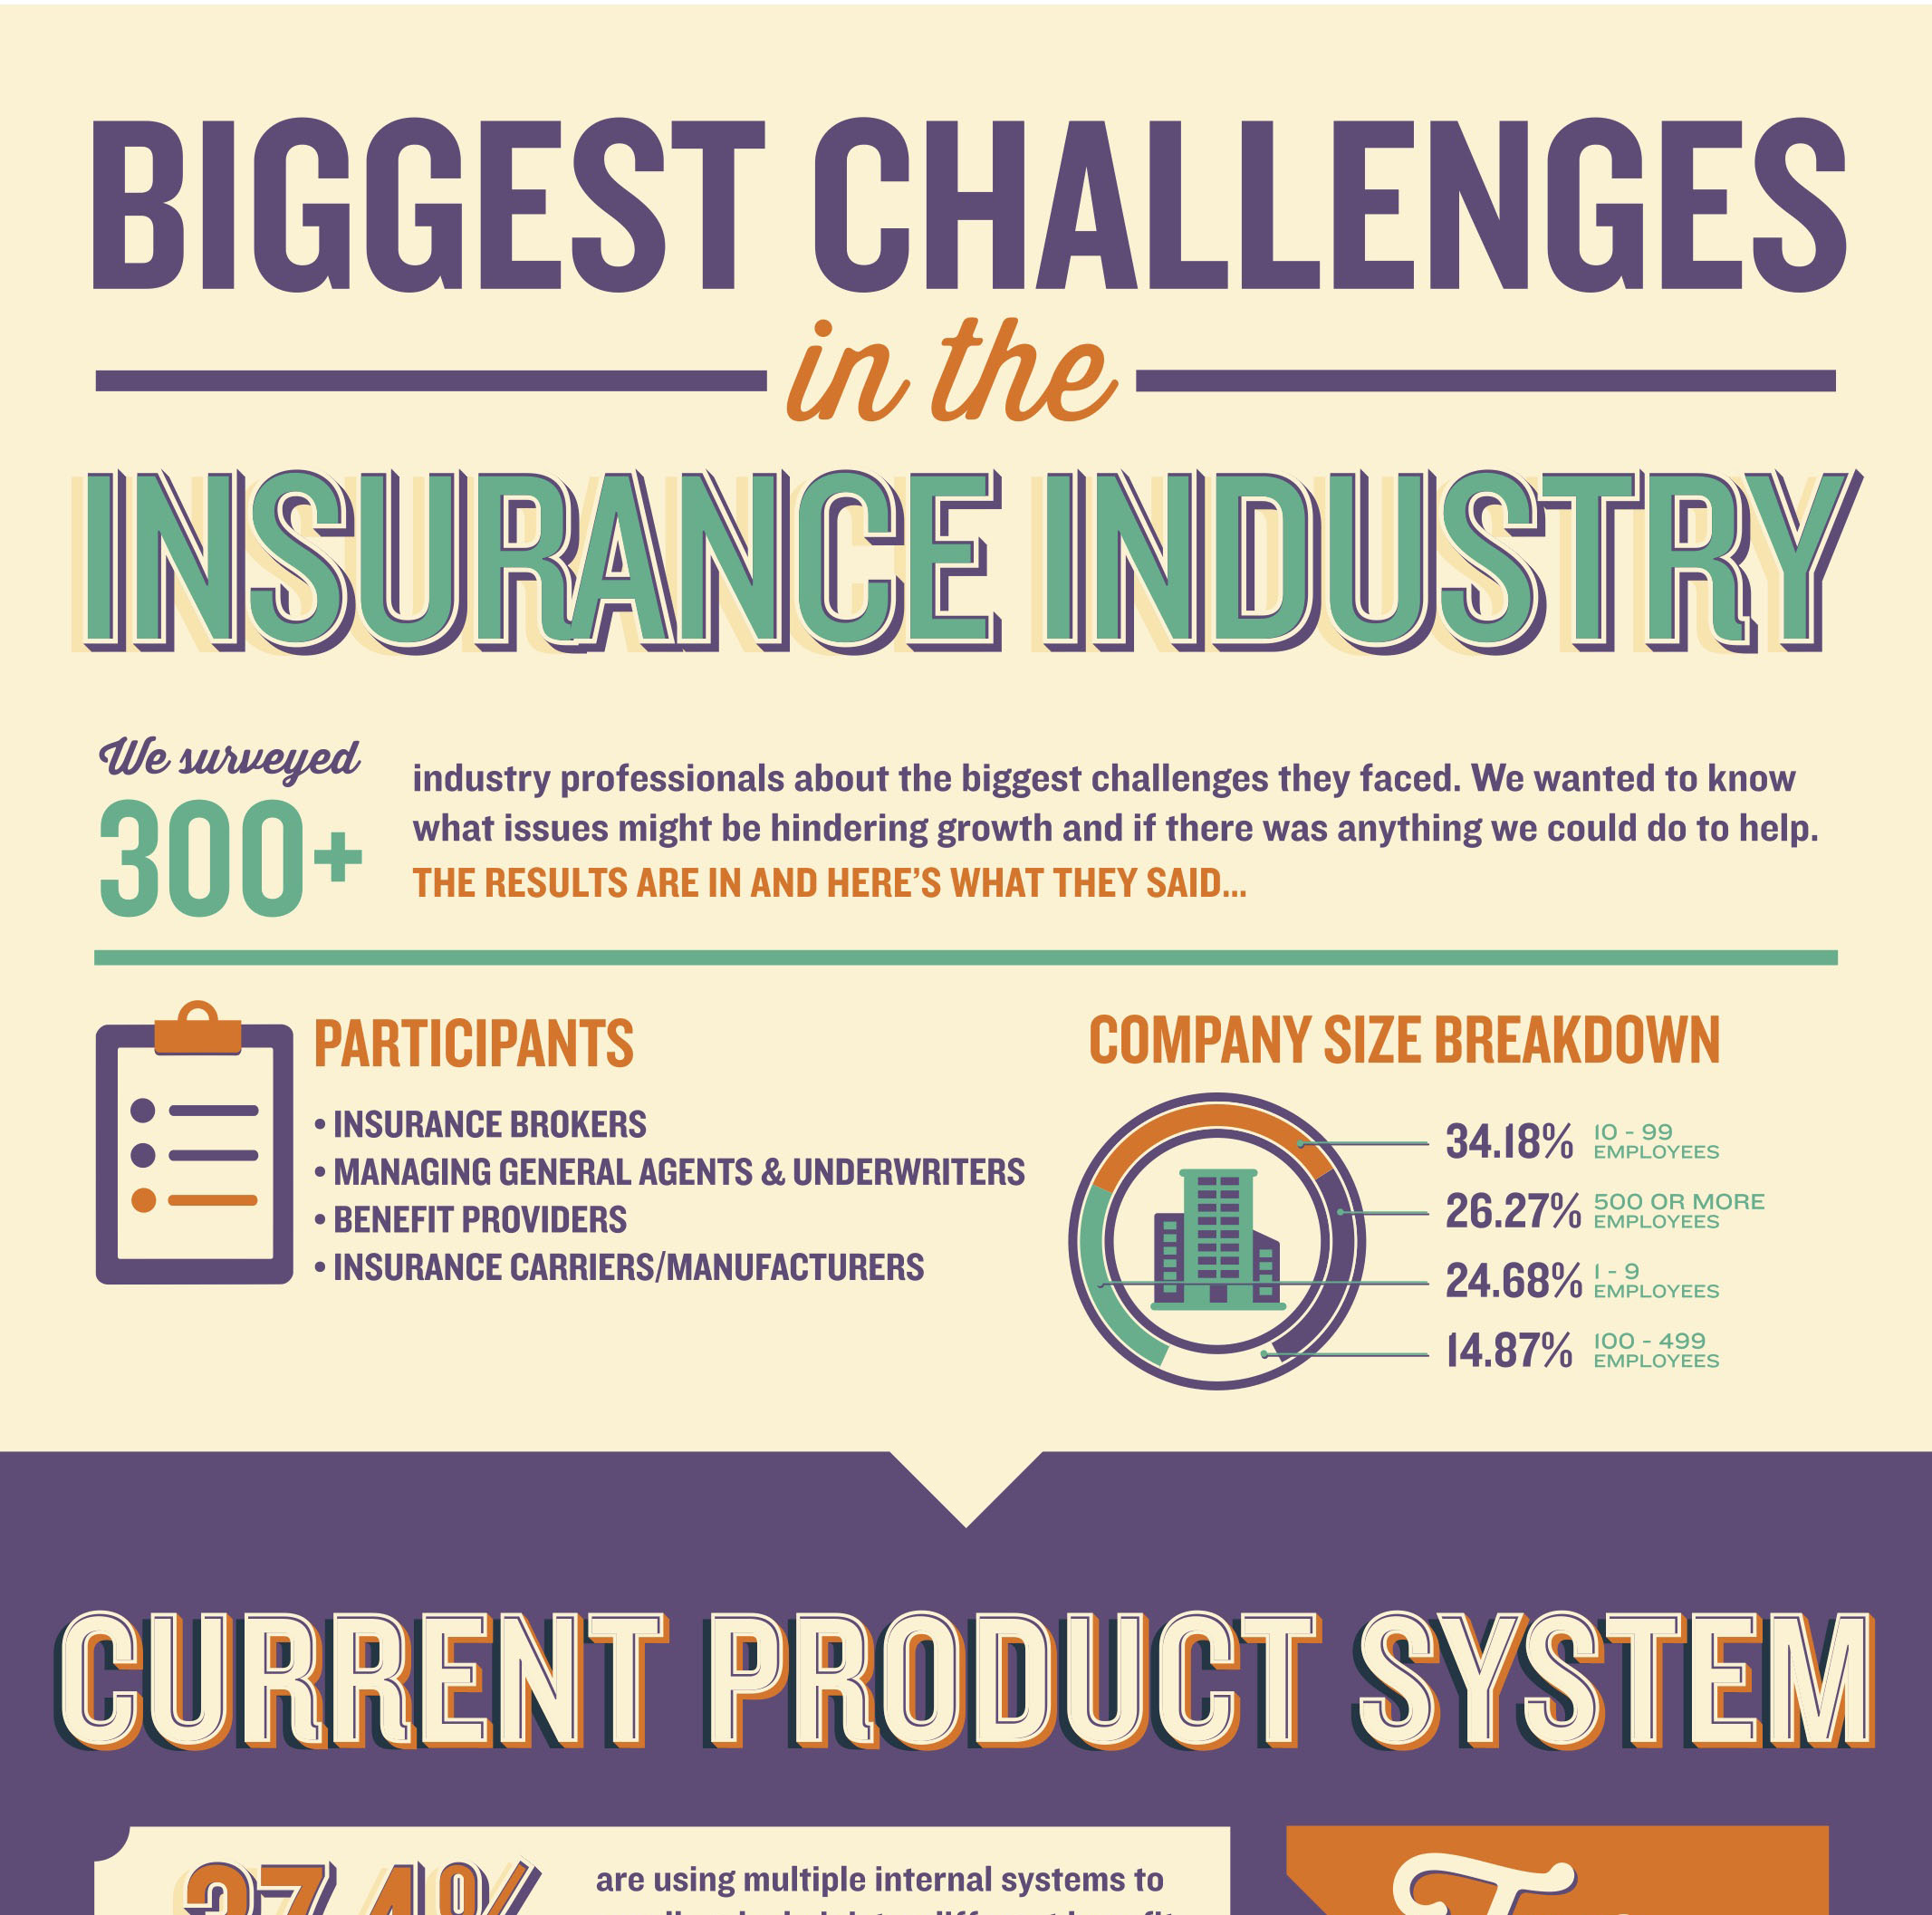 Biggest Challenges in the Insurance Industry